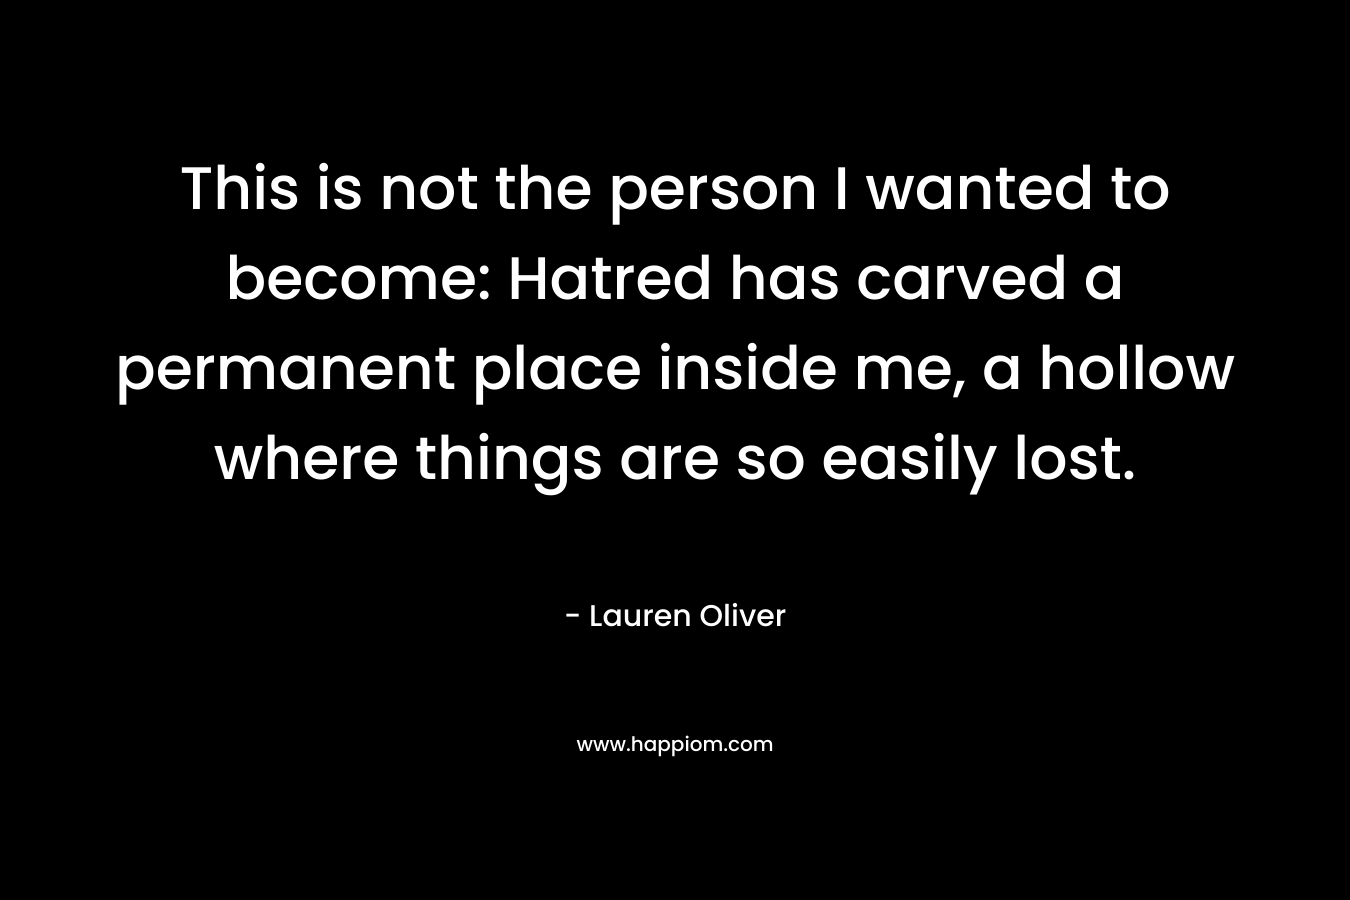 This is not the person I wanted to become: Hatred has carved a permanent place inside me, a hollow where things are so easily lost. – Lauren Oliver